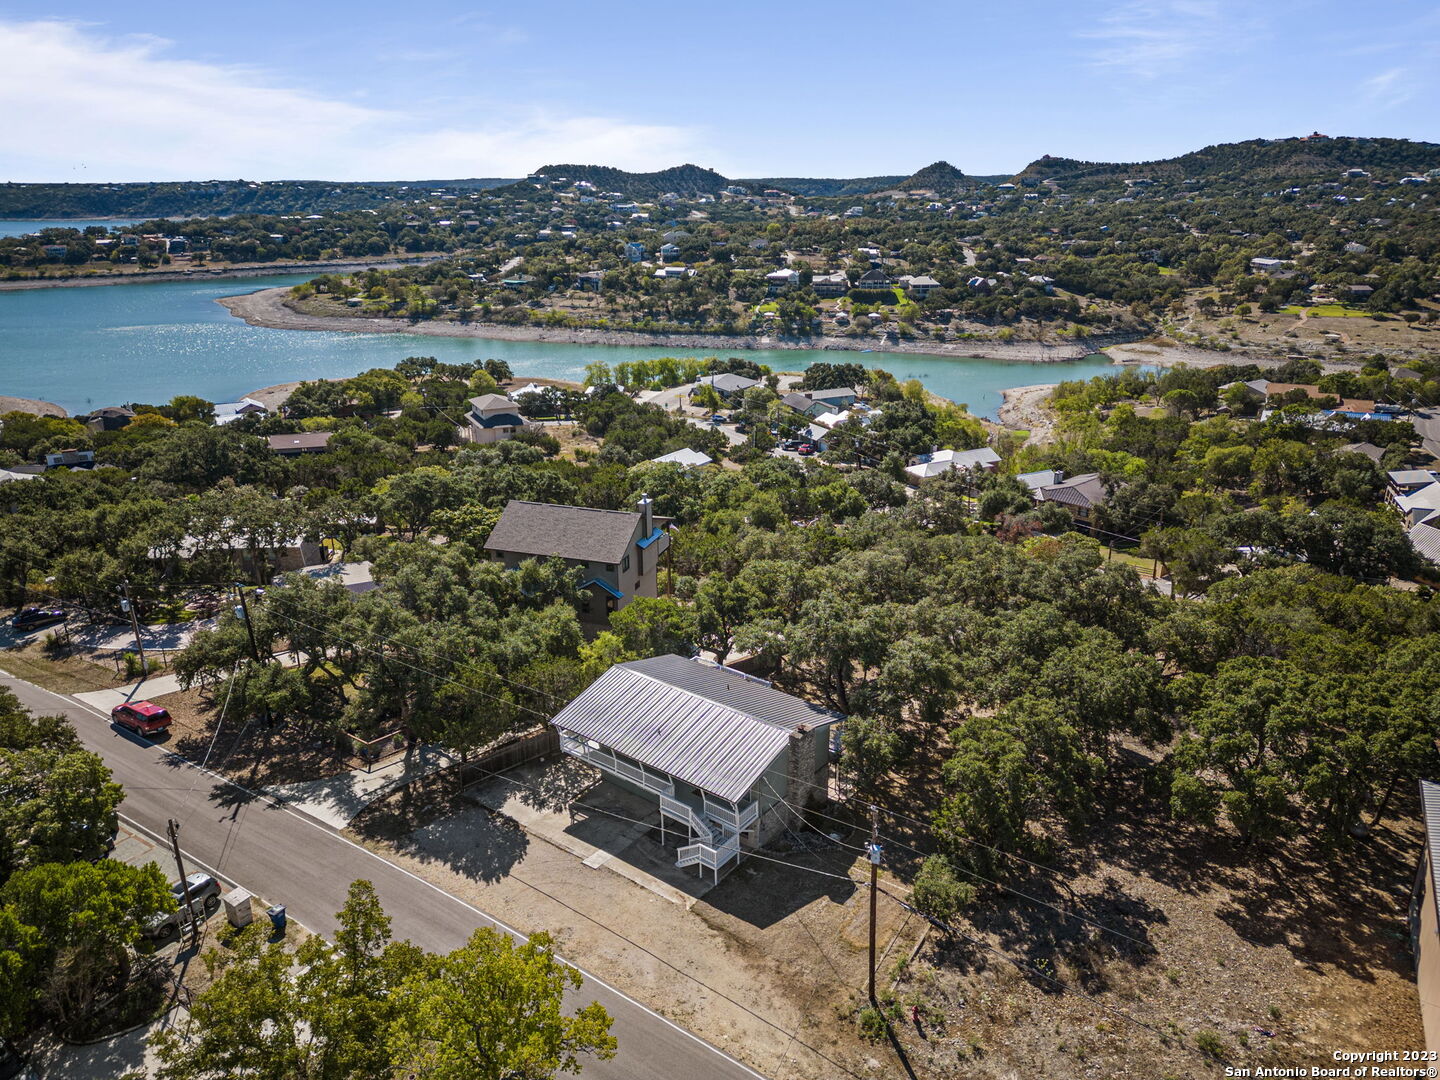 an aerial view of residential house with outdoor space and lake view